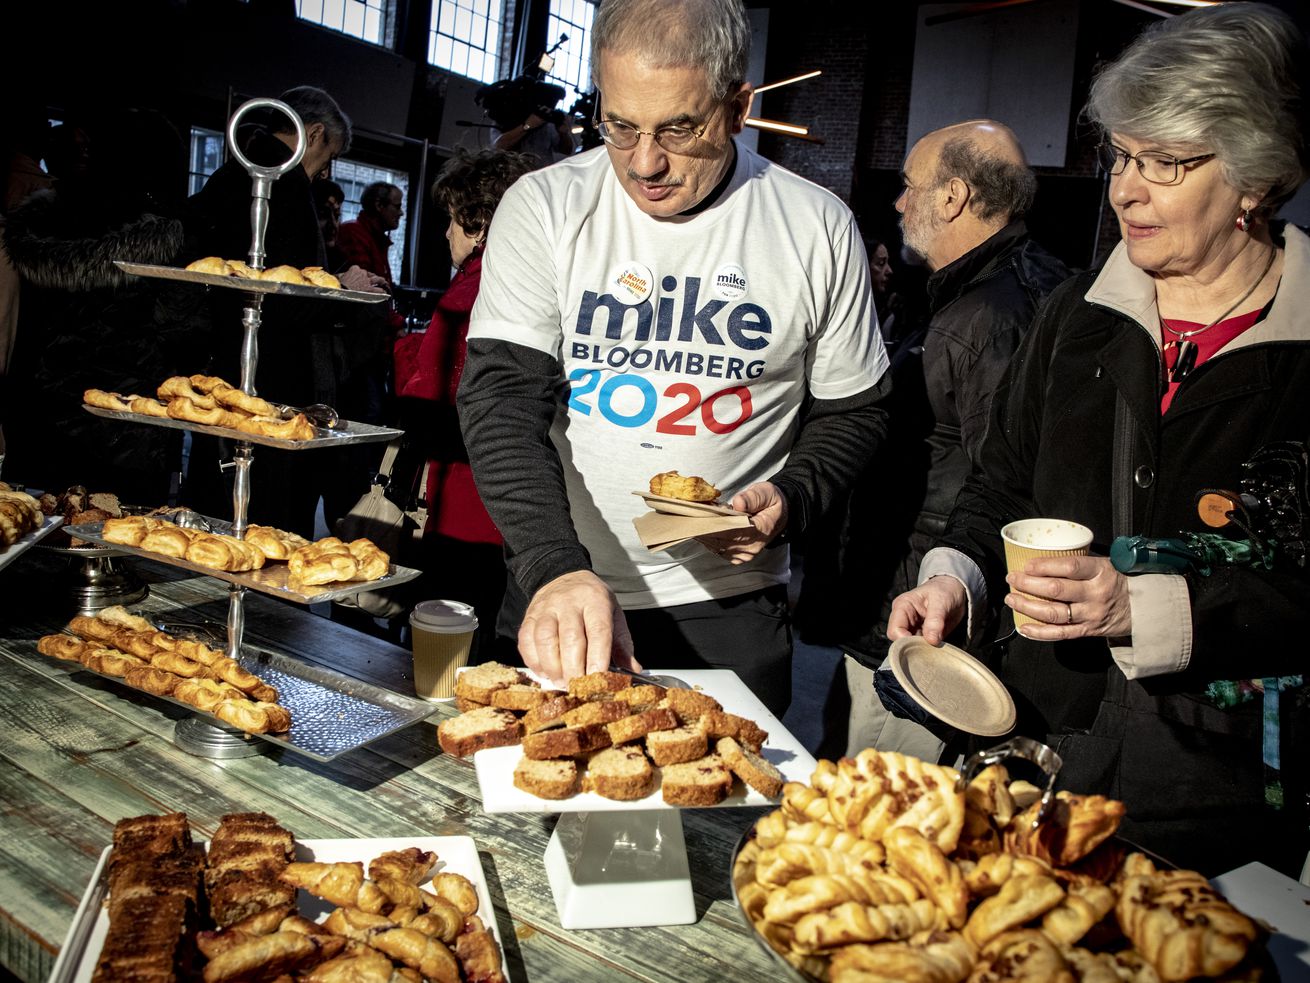 Man and woman look like a table filled with pastries; the man wears a shirt that reads “Mike Bloomberg 2020.”